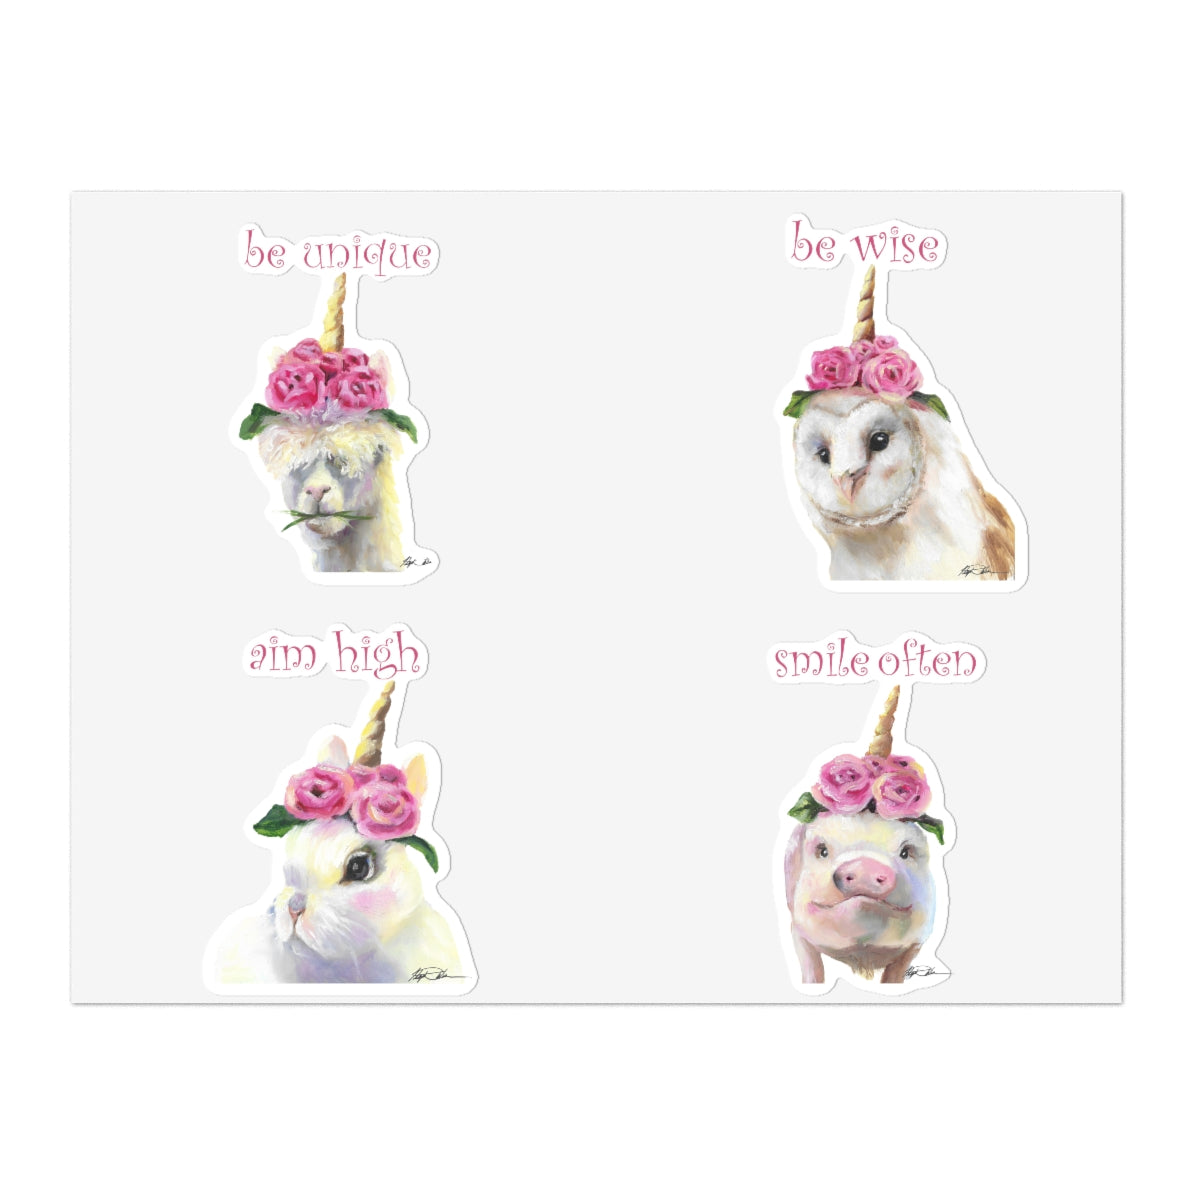 Unicorn, Bunny, Owl, Llama, Pig Stickers, Cute Stickers, Inspirational Stickers, Stickers for Her